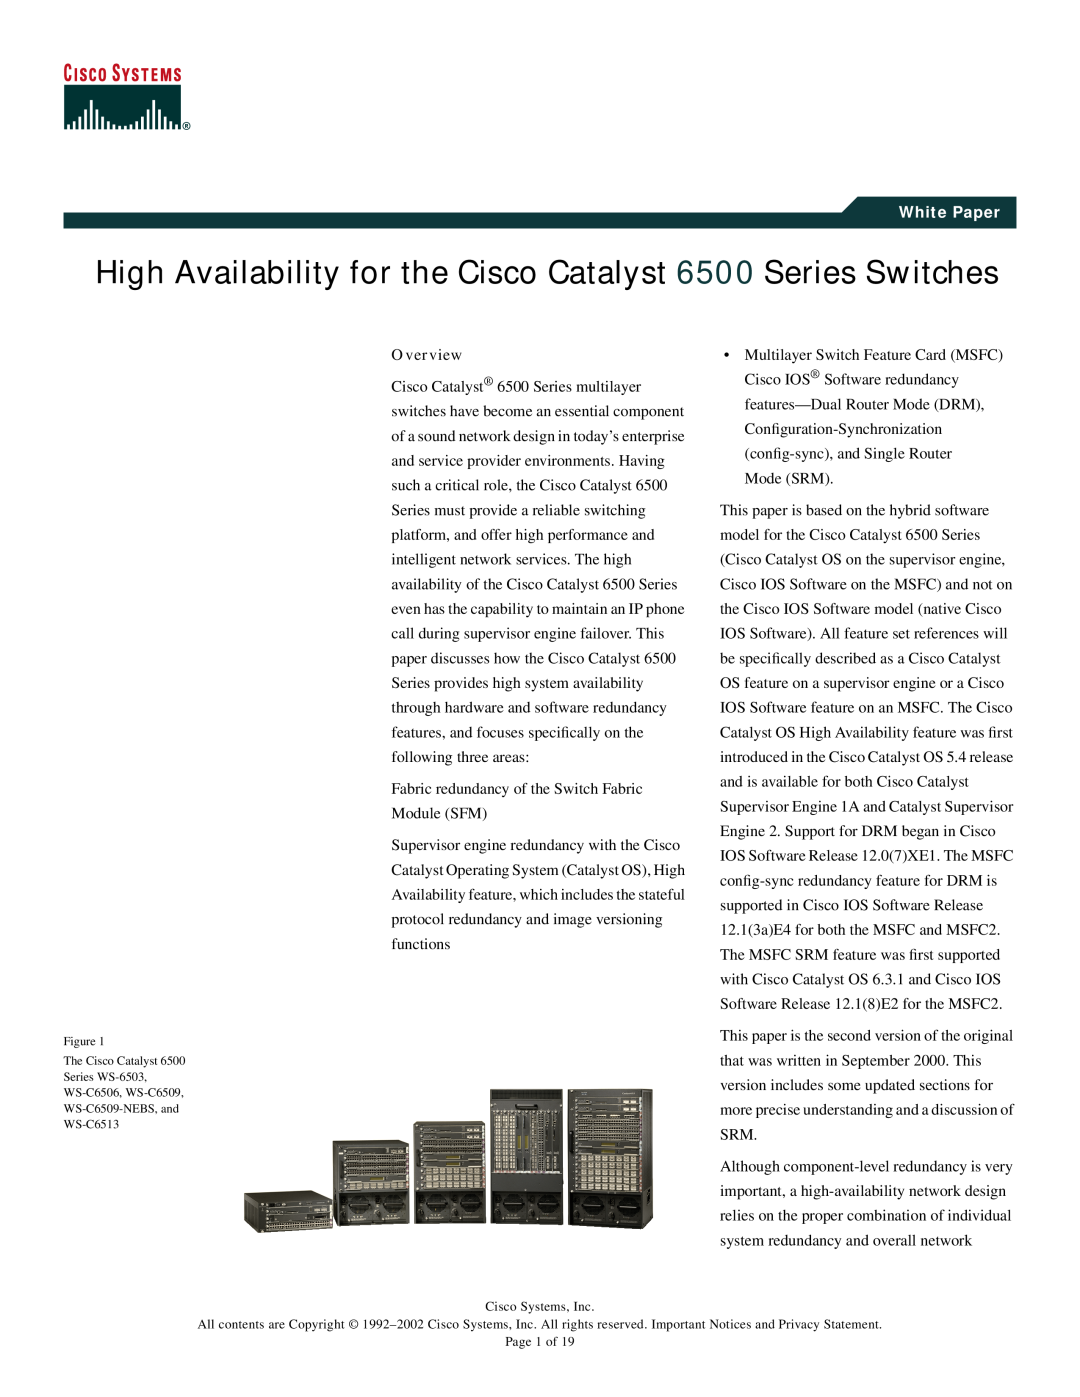 Cisco Systems 6503 manual High Availability for the Cisco Catalyst 6500 Series Switches, White Paper 